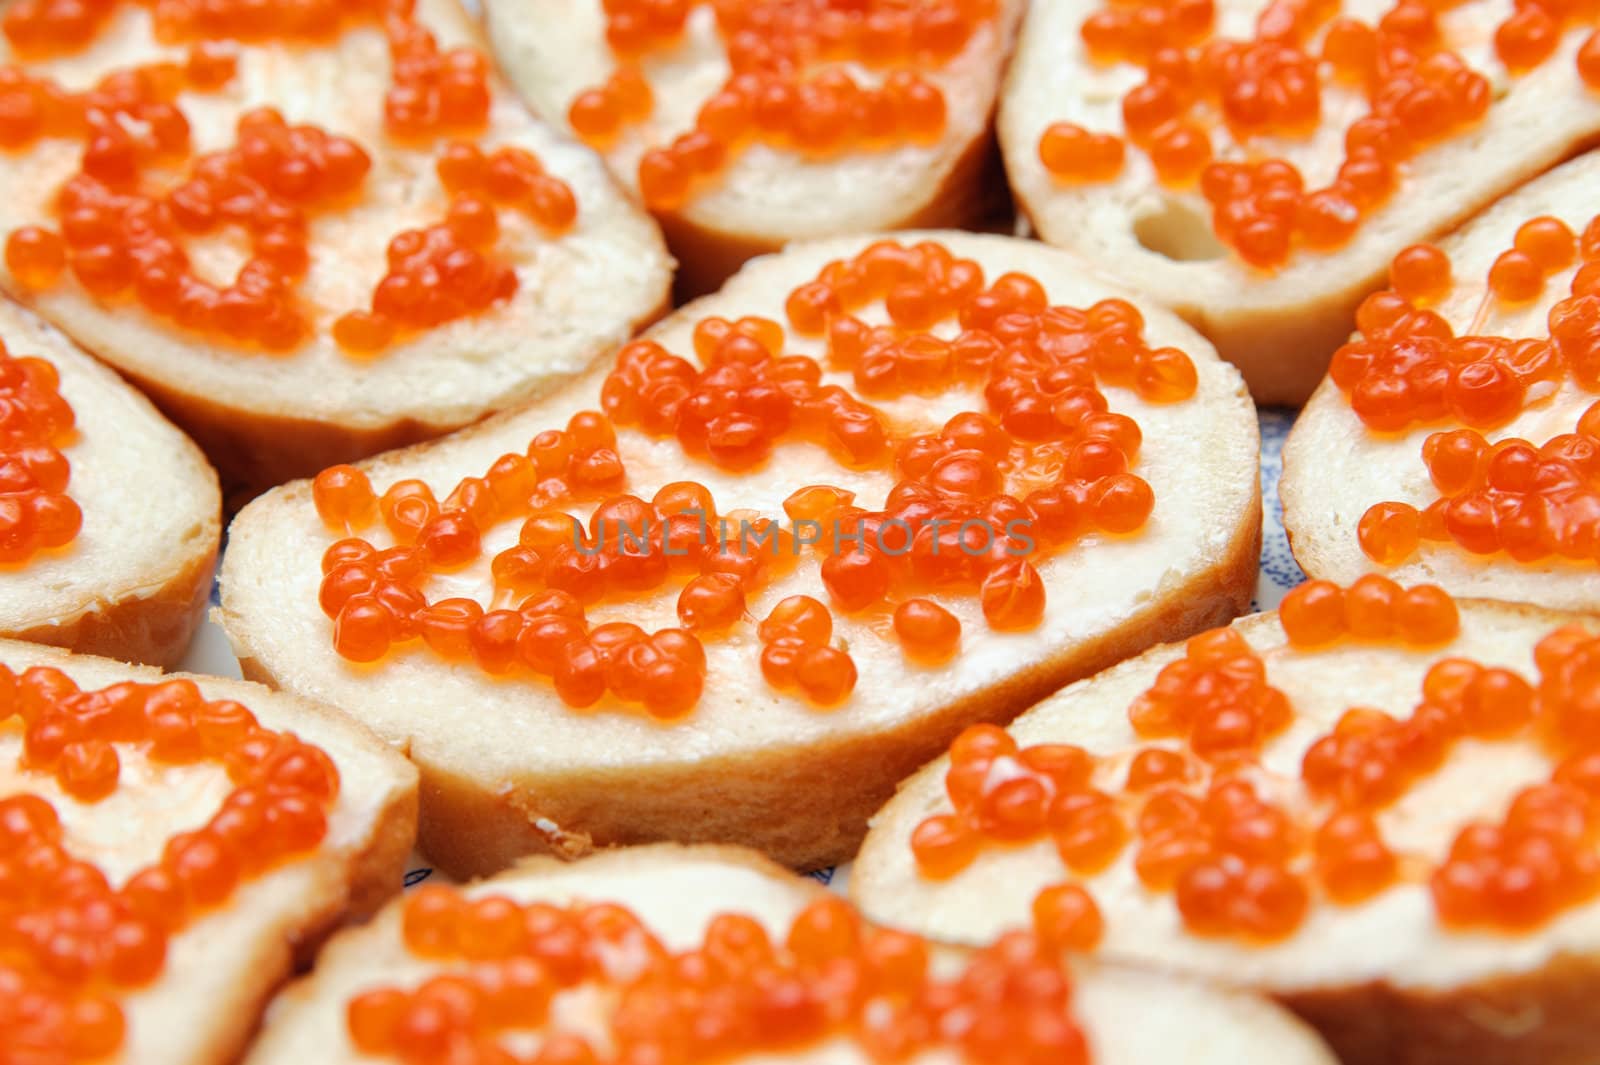 bread and butter with red caviar. Gourmet food by docer2000